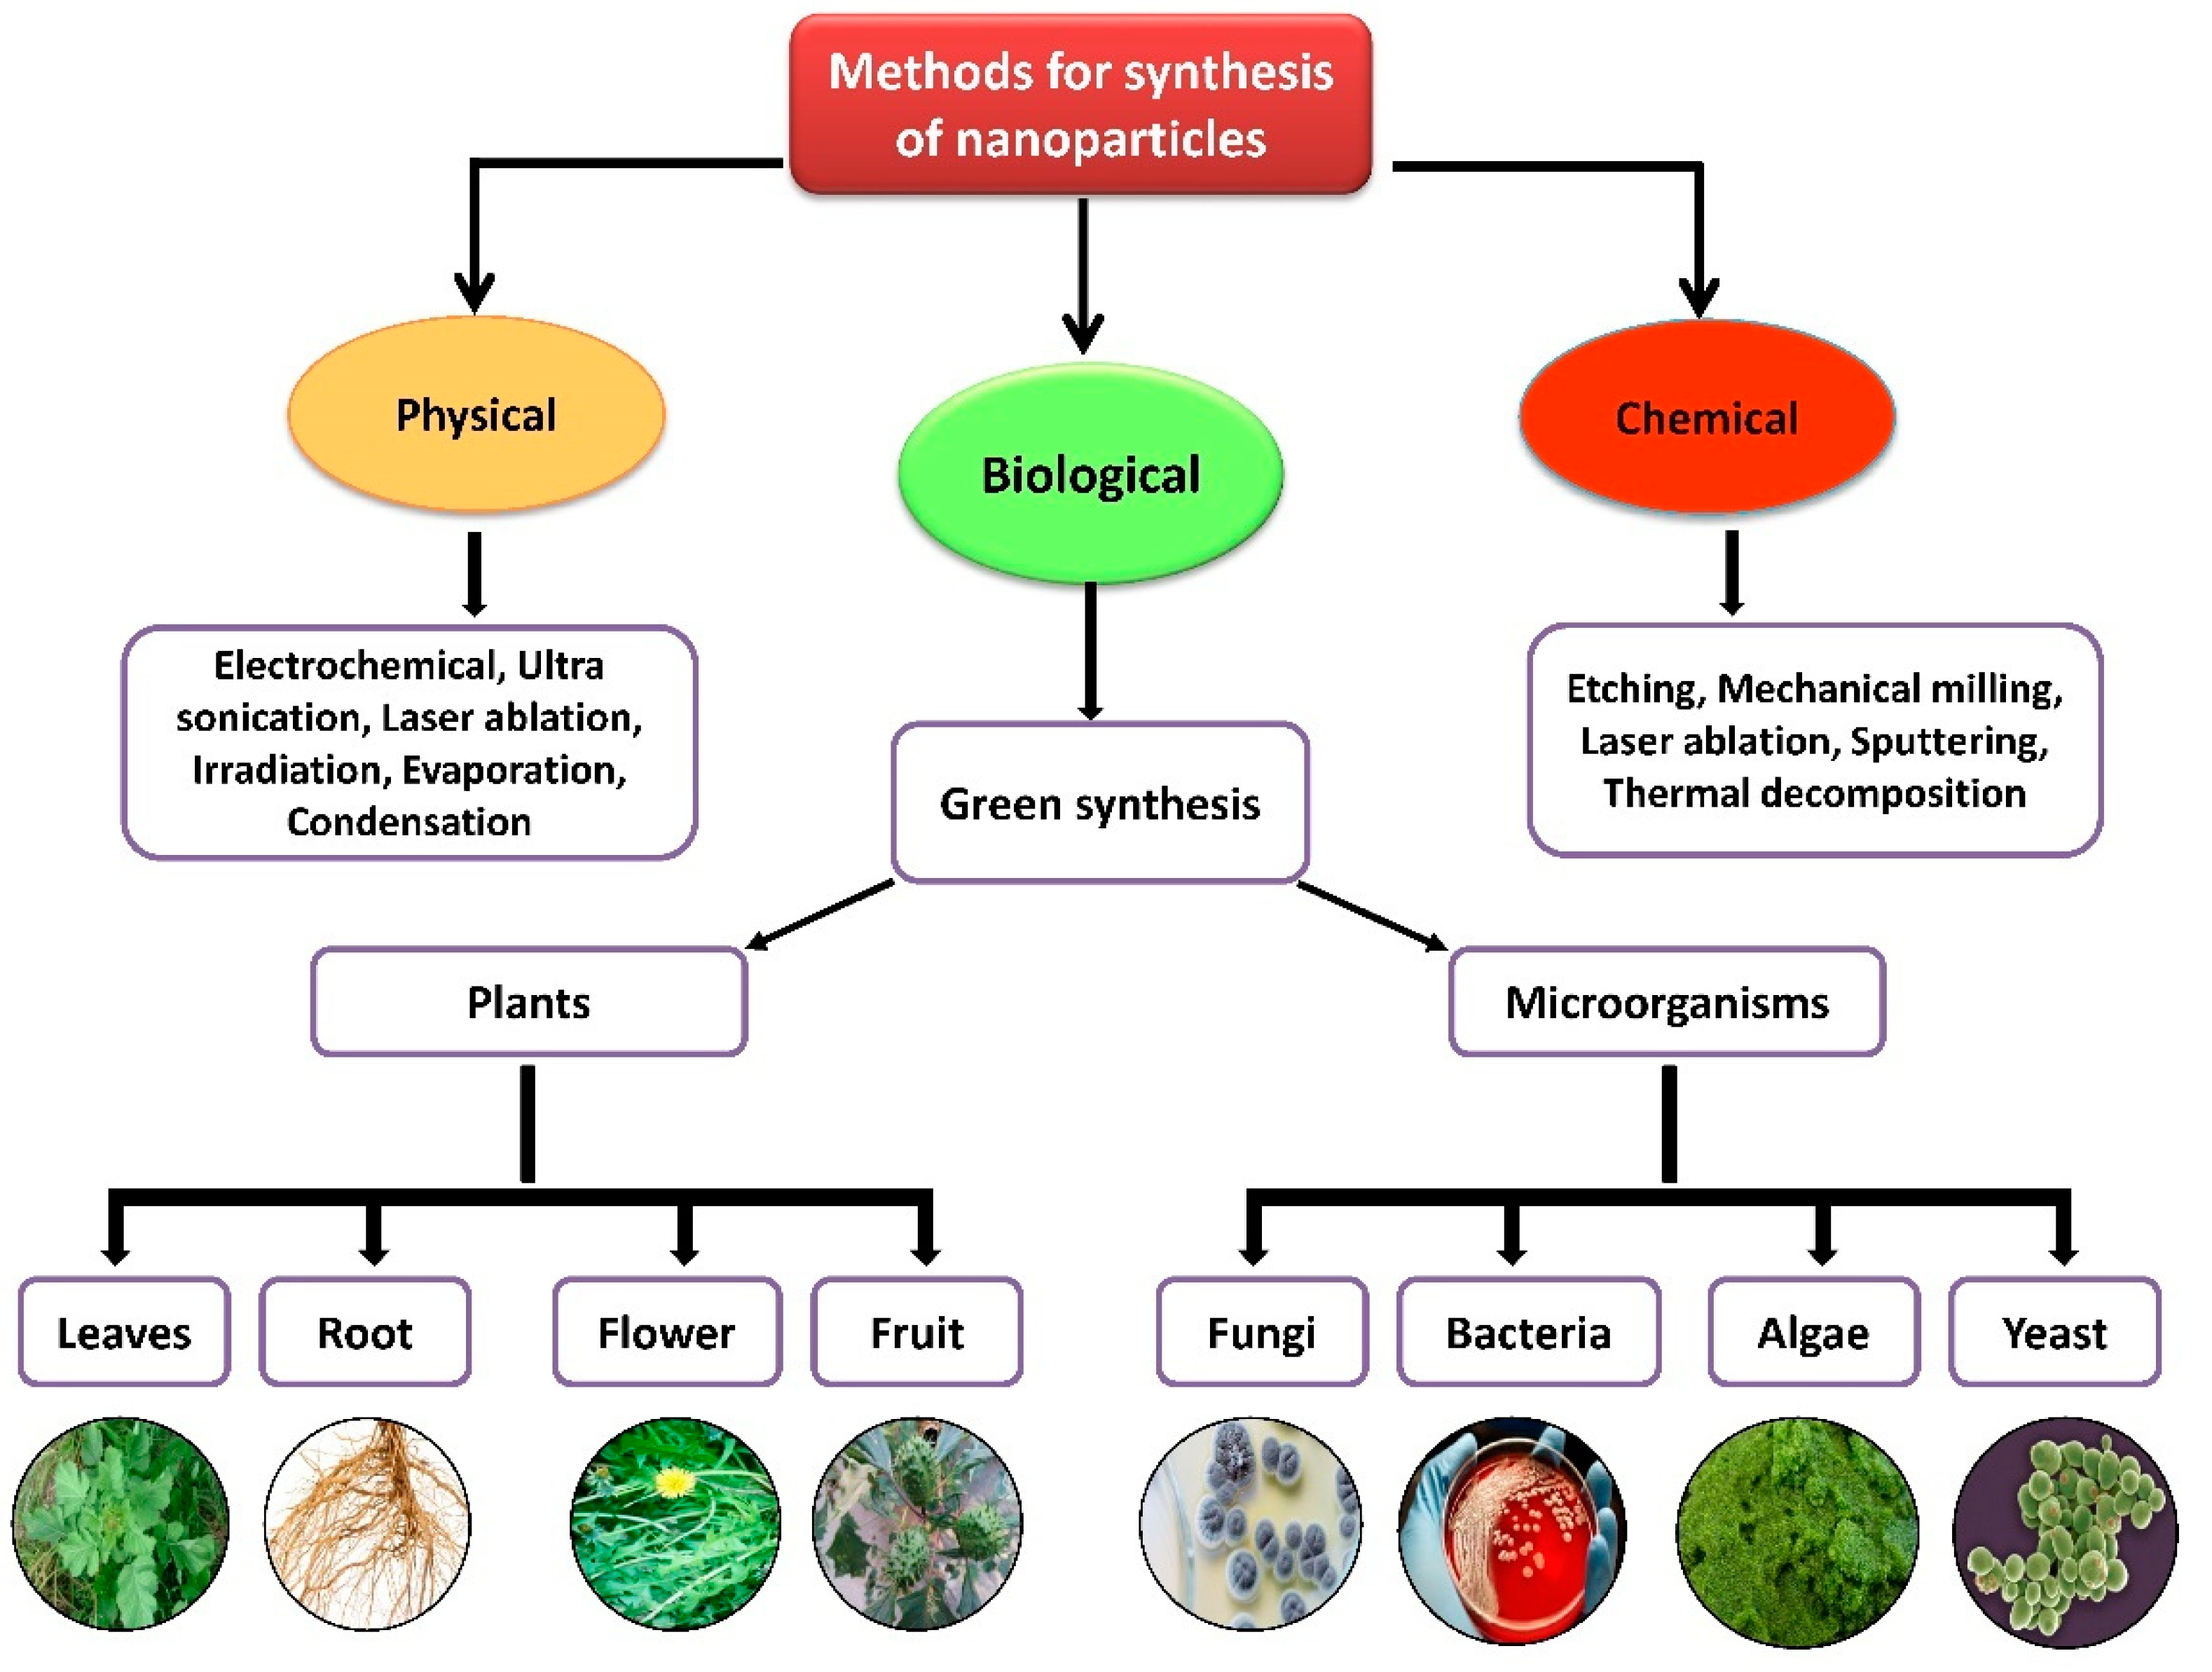 green synthesis method of nanoparticles